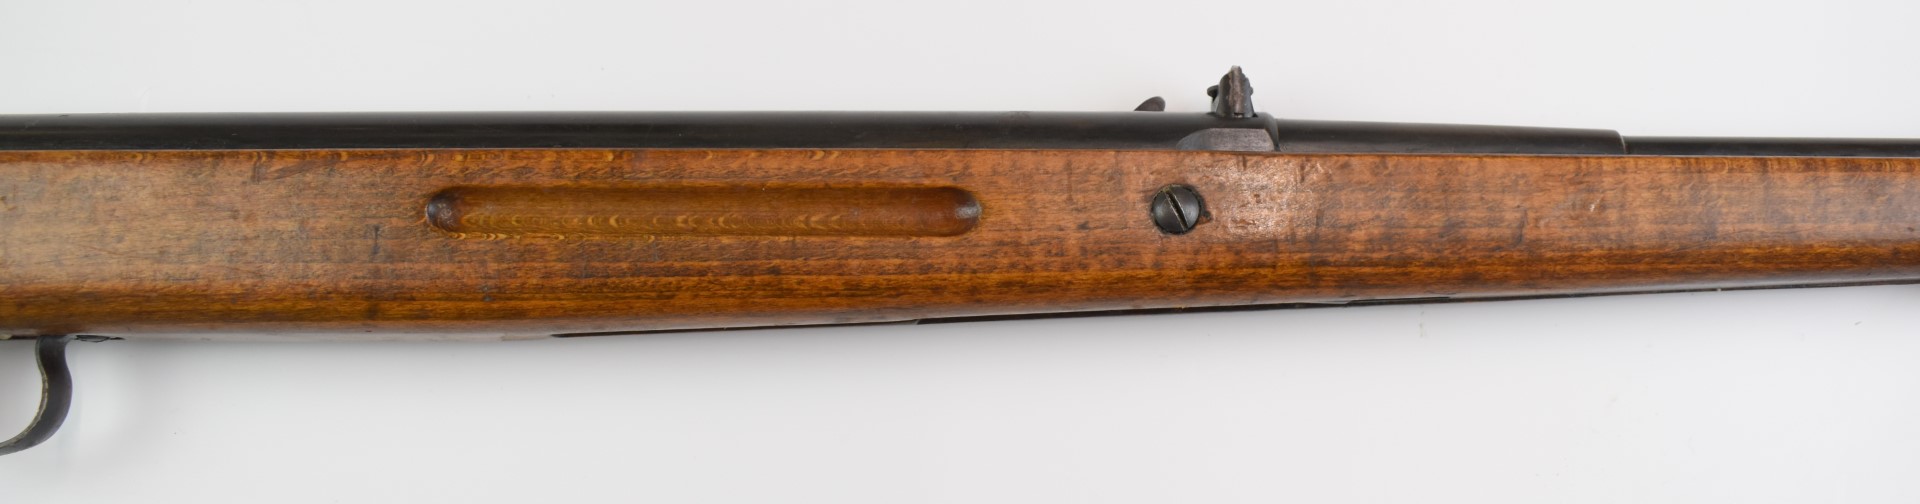 Original Mod 50E .22 under-lever air rifle with semi-pistol grip and adjustable sights and - Image 4 of 10